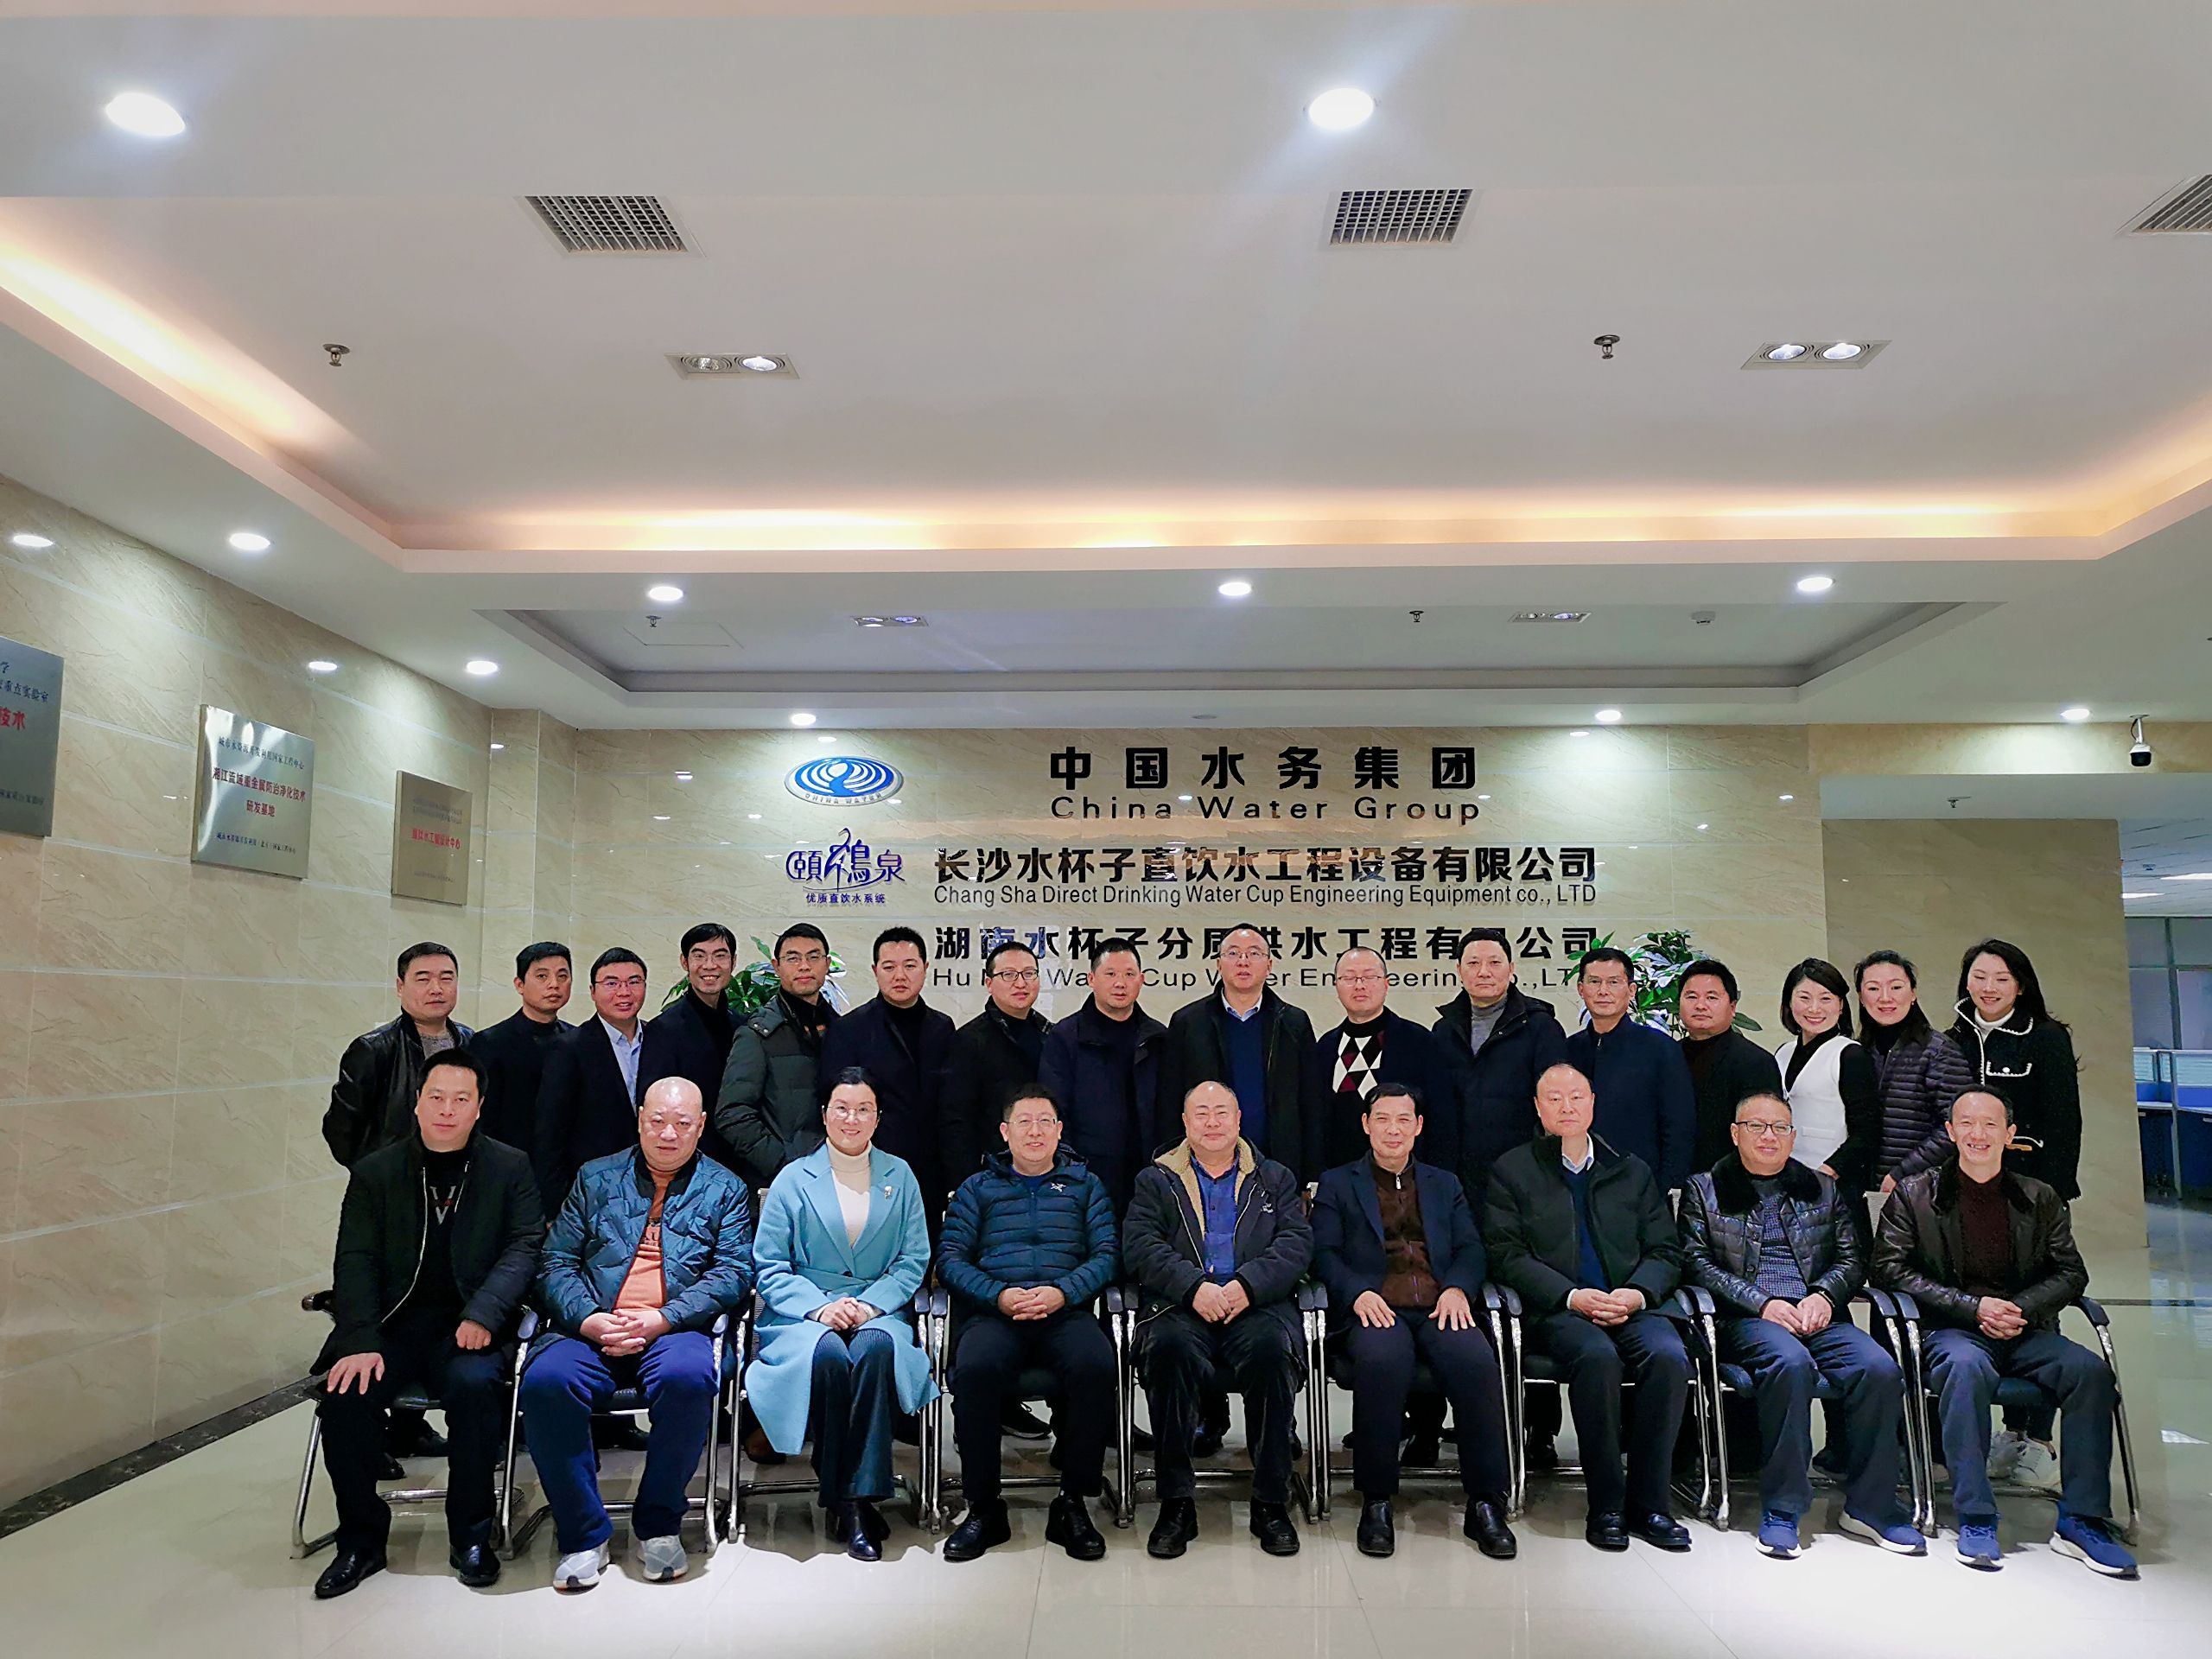 Leaders of Dianjiang County Government in Chongqing visited the company for research and inspection